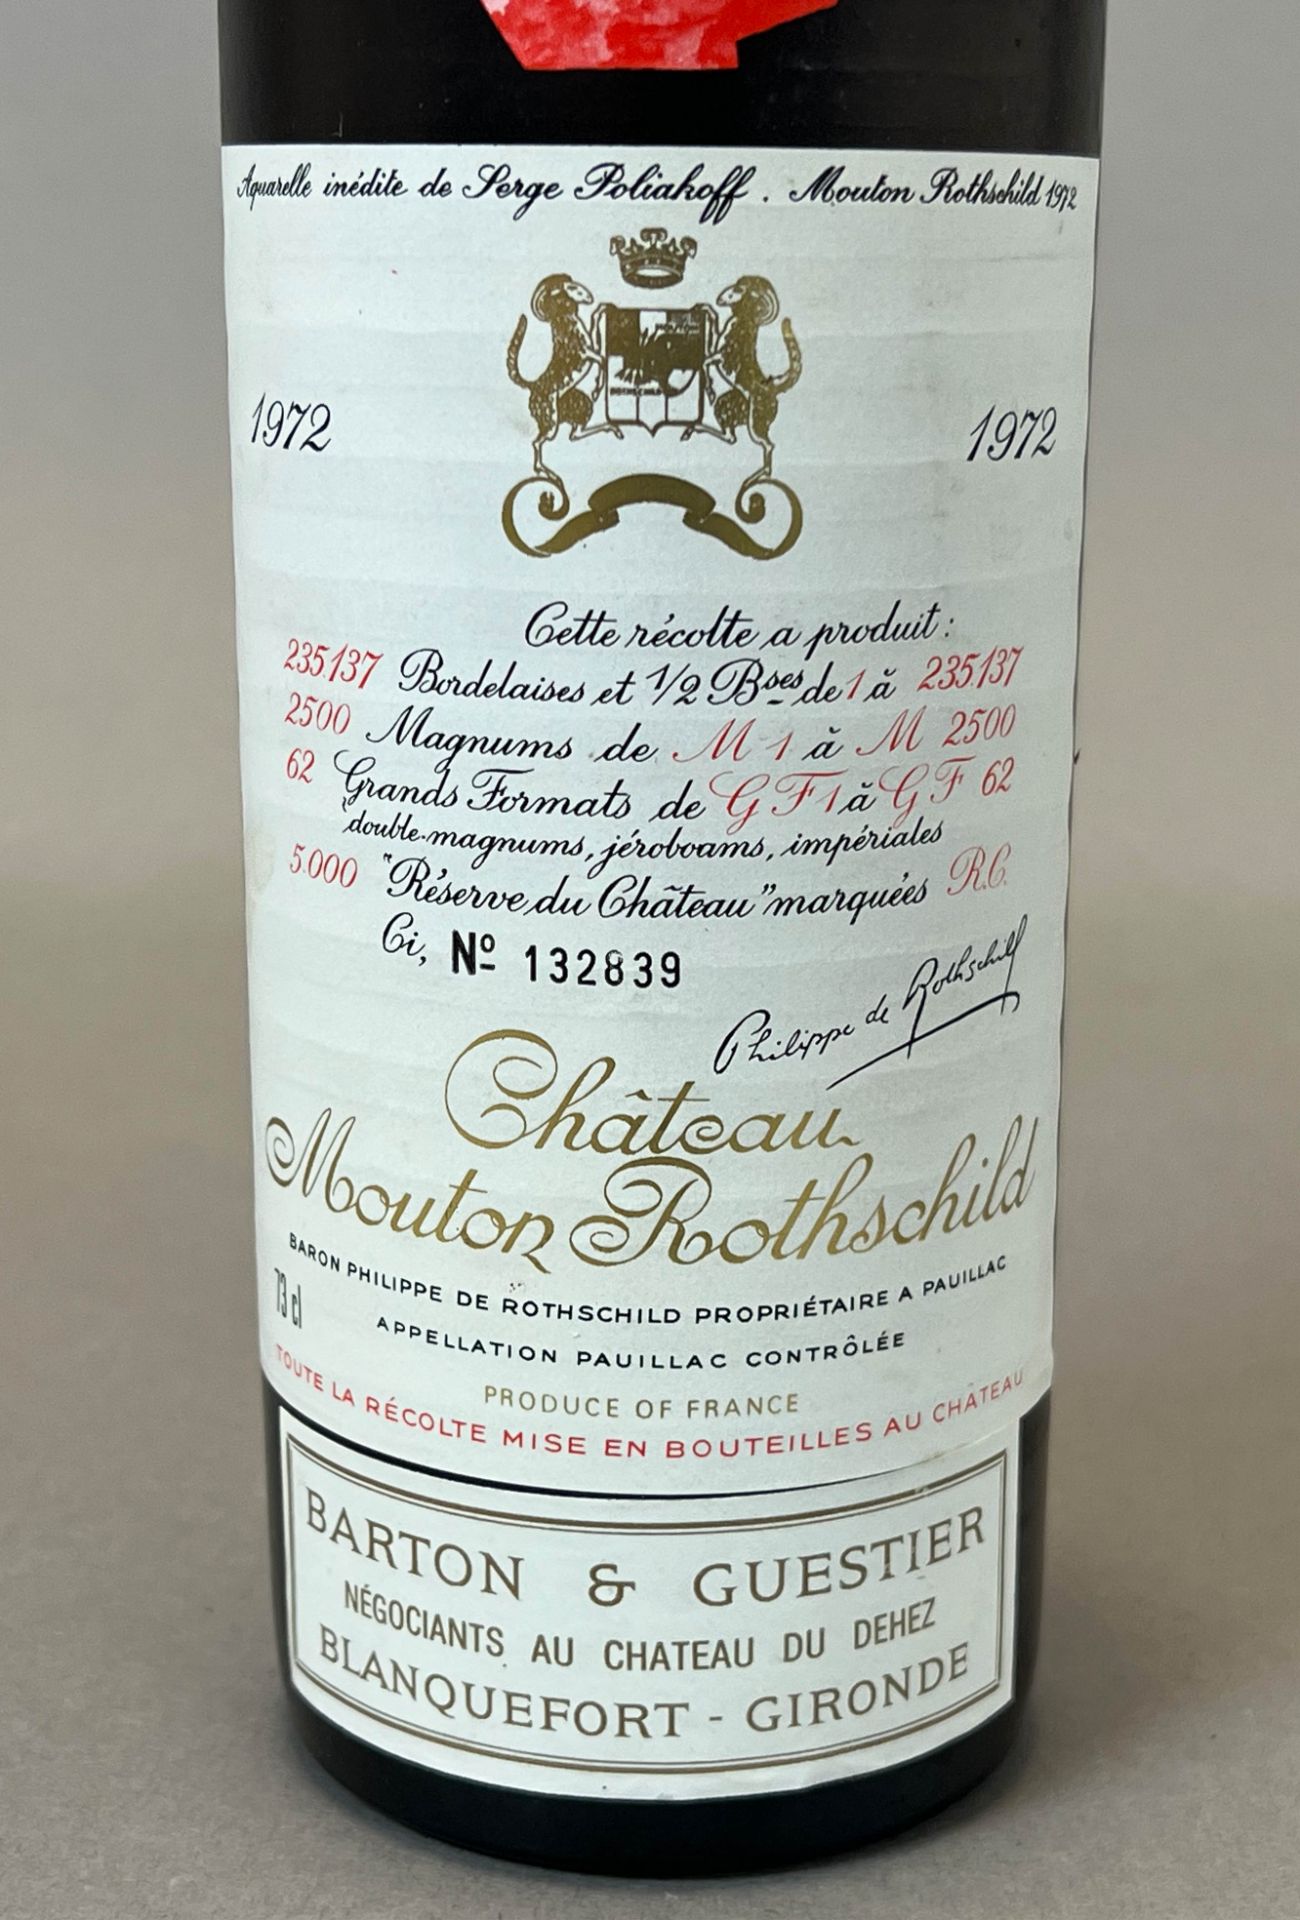 1 bottle of red wine. Château Mouton Rothschild. Pauillac. Premier Grand Cru. - Image 3 of 5